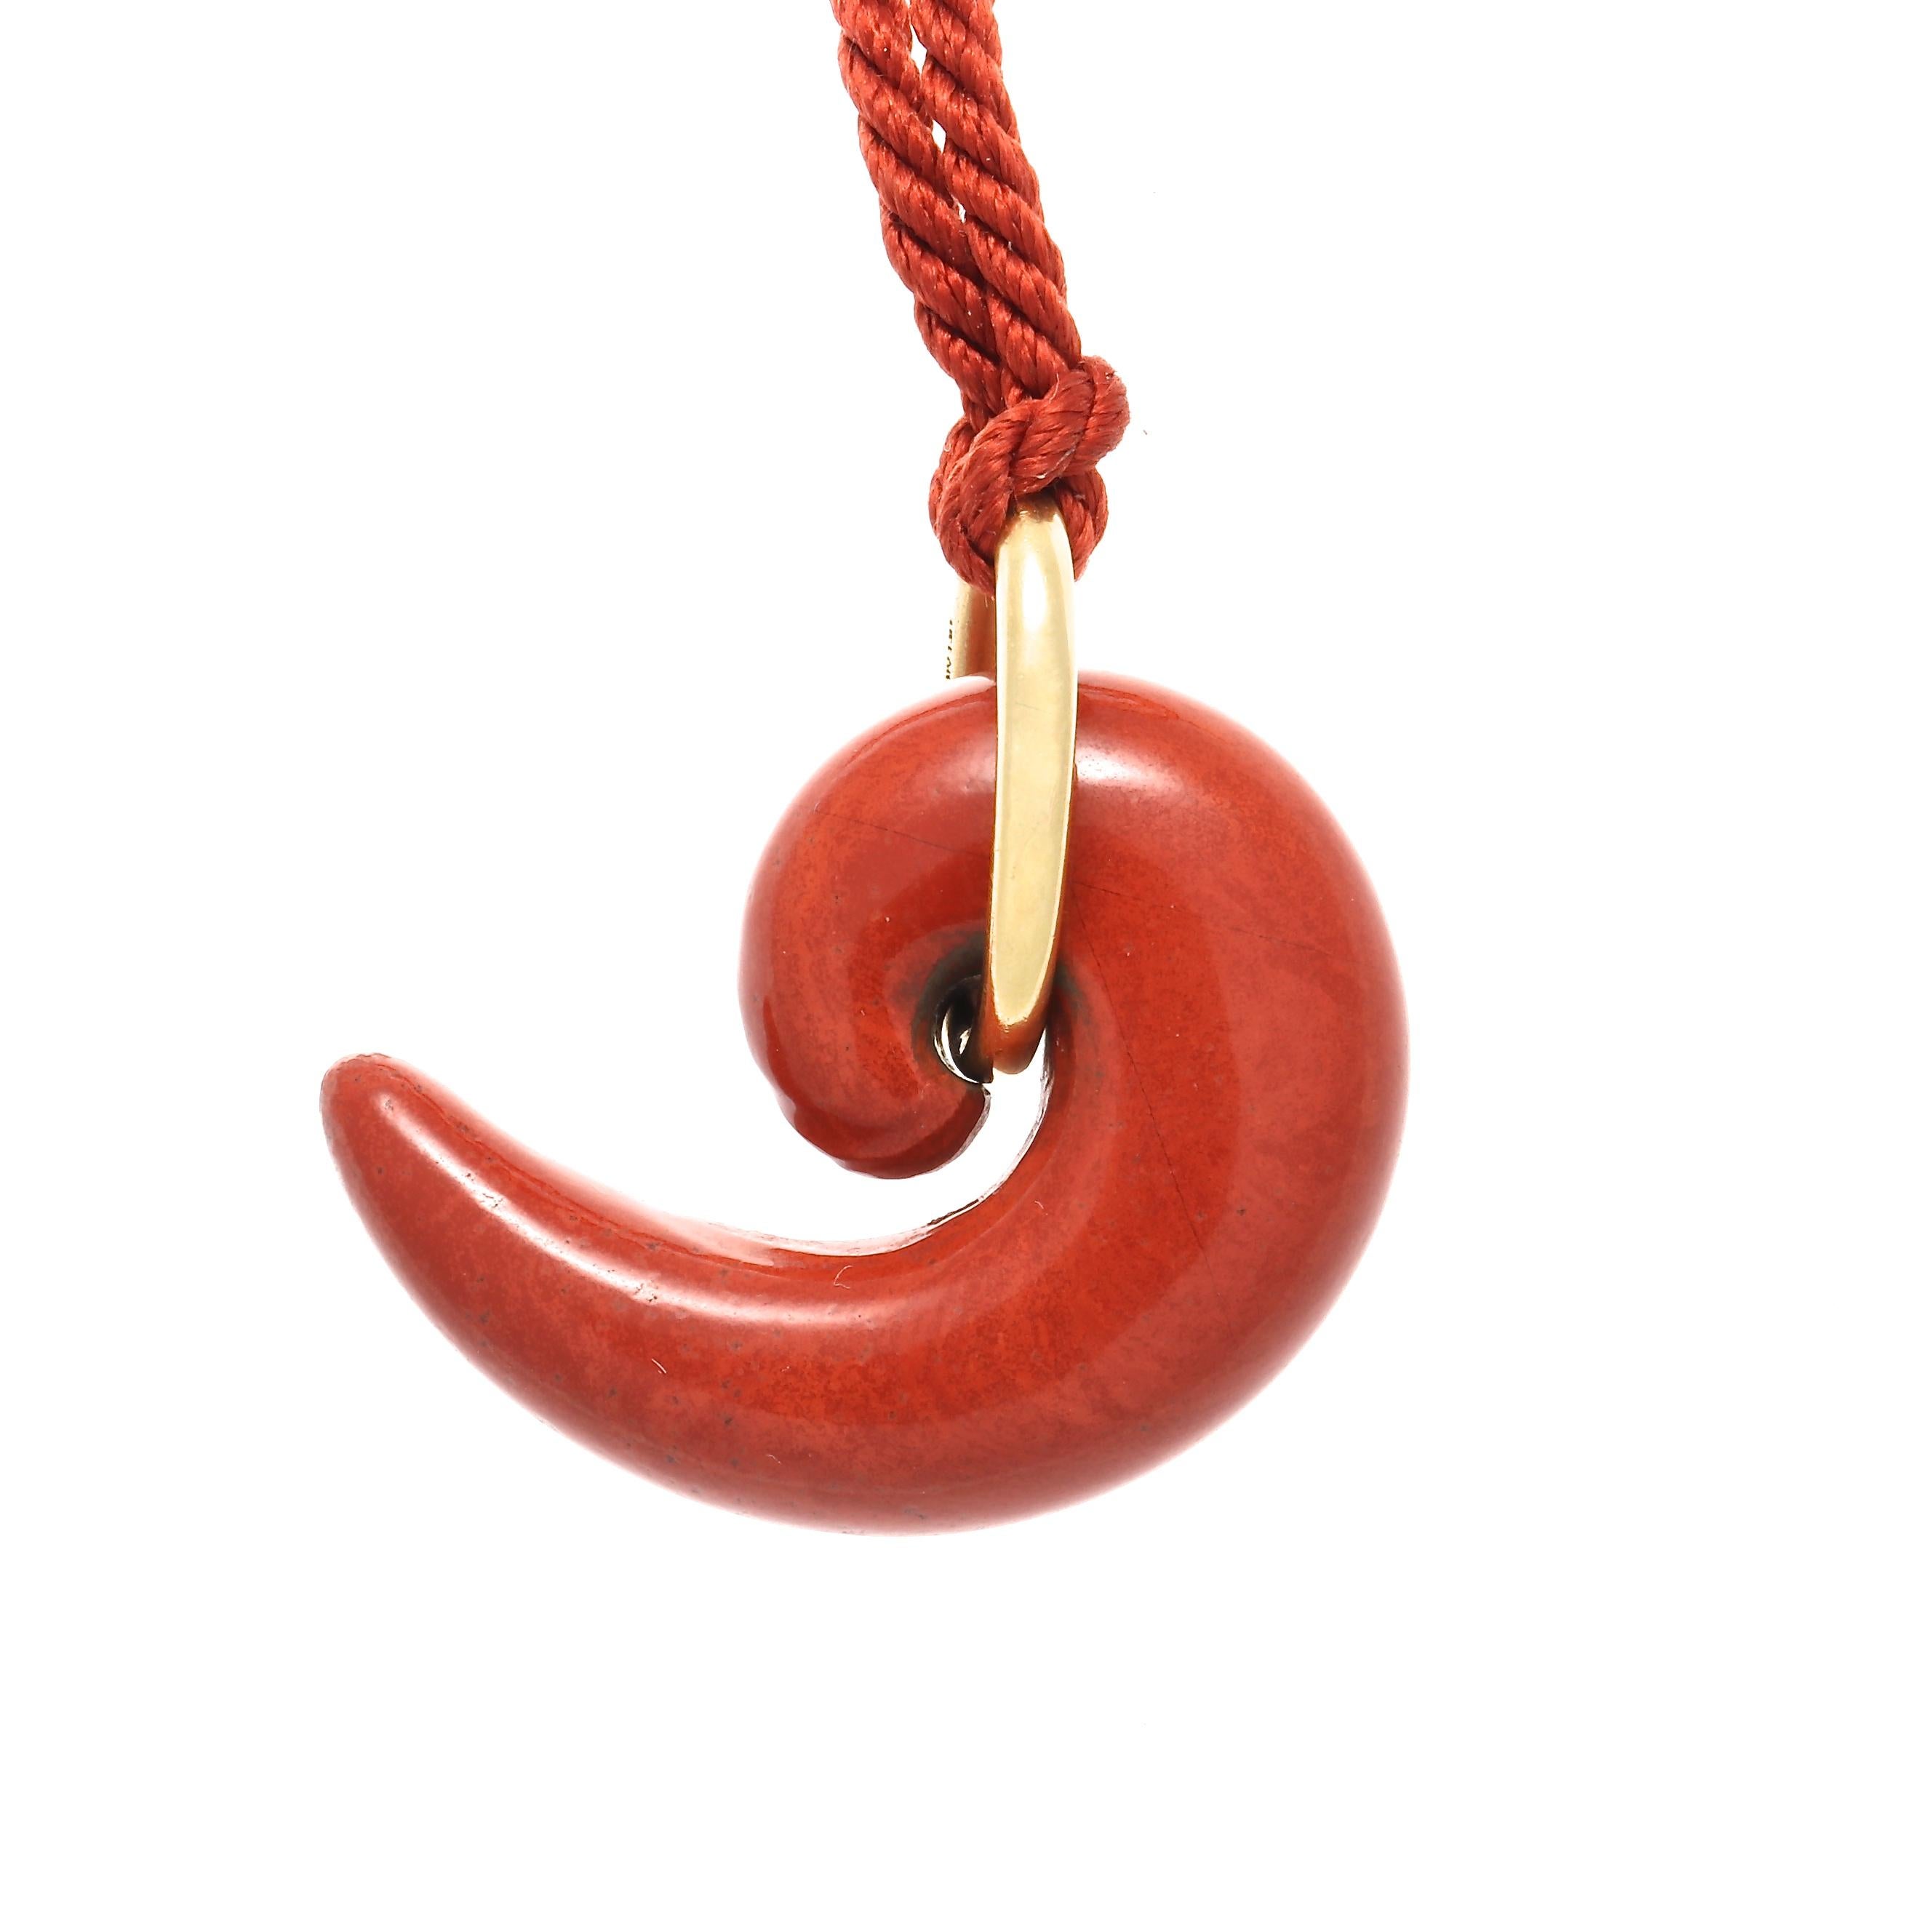 A stone of physical strength and energy, red Jasper is said to increases one's life force, health and passion, bringing the courage to face unpleasant tasks and to rectify unjust situations. Designed with a swooping multicolored red Jasper hanging